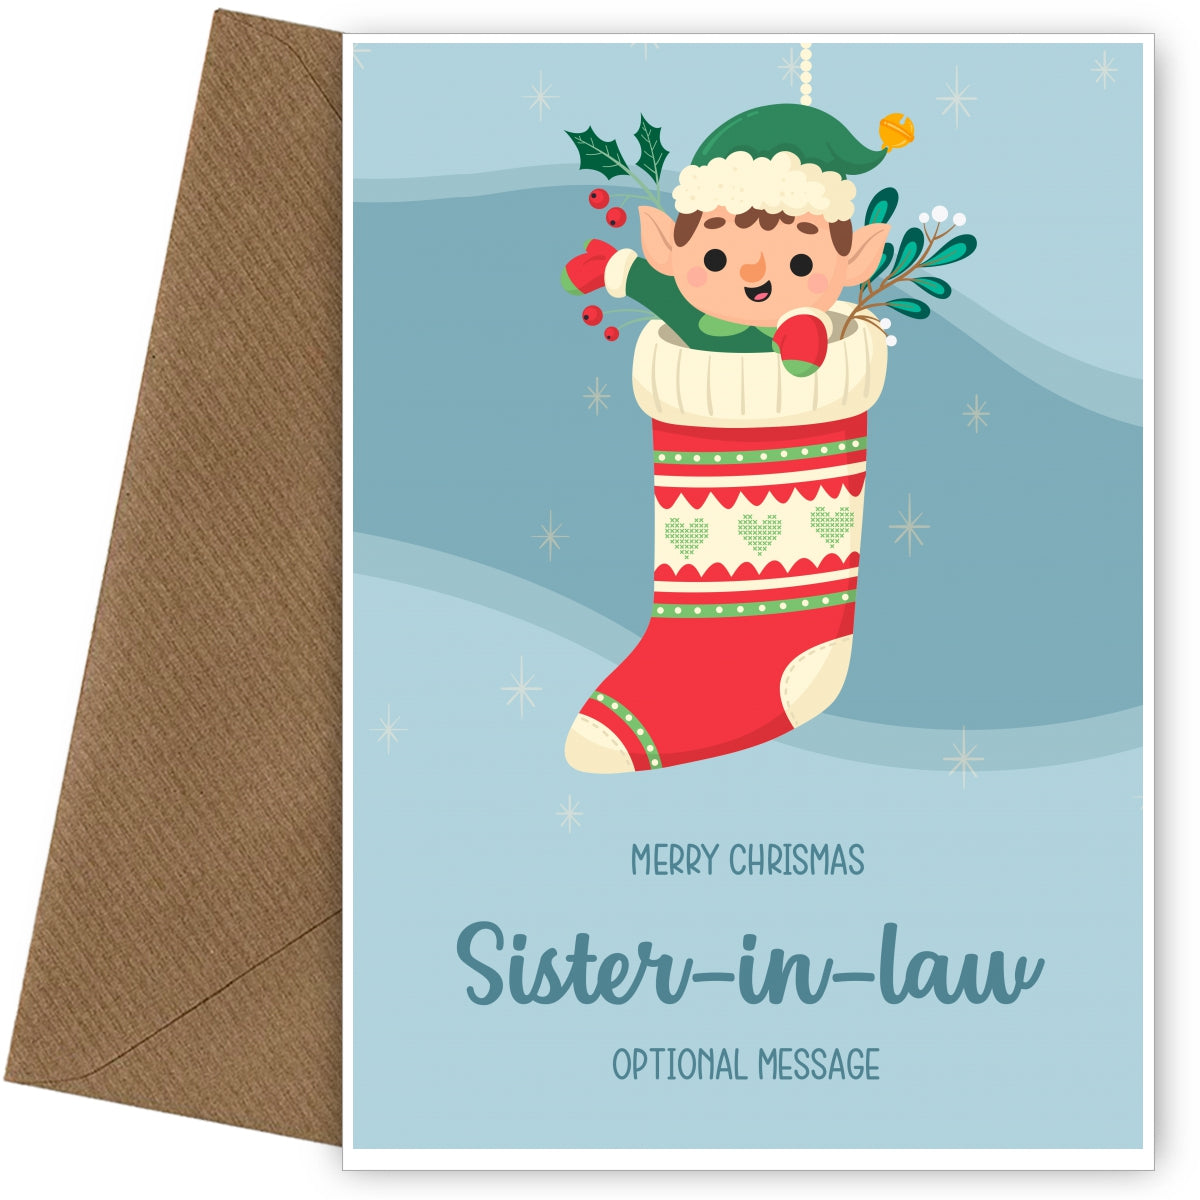 Merry Christmas Card for Sister-in-law - Elf Stocking